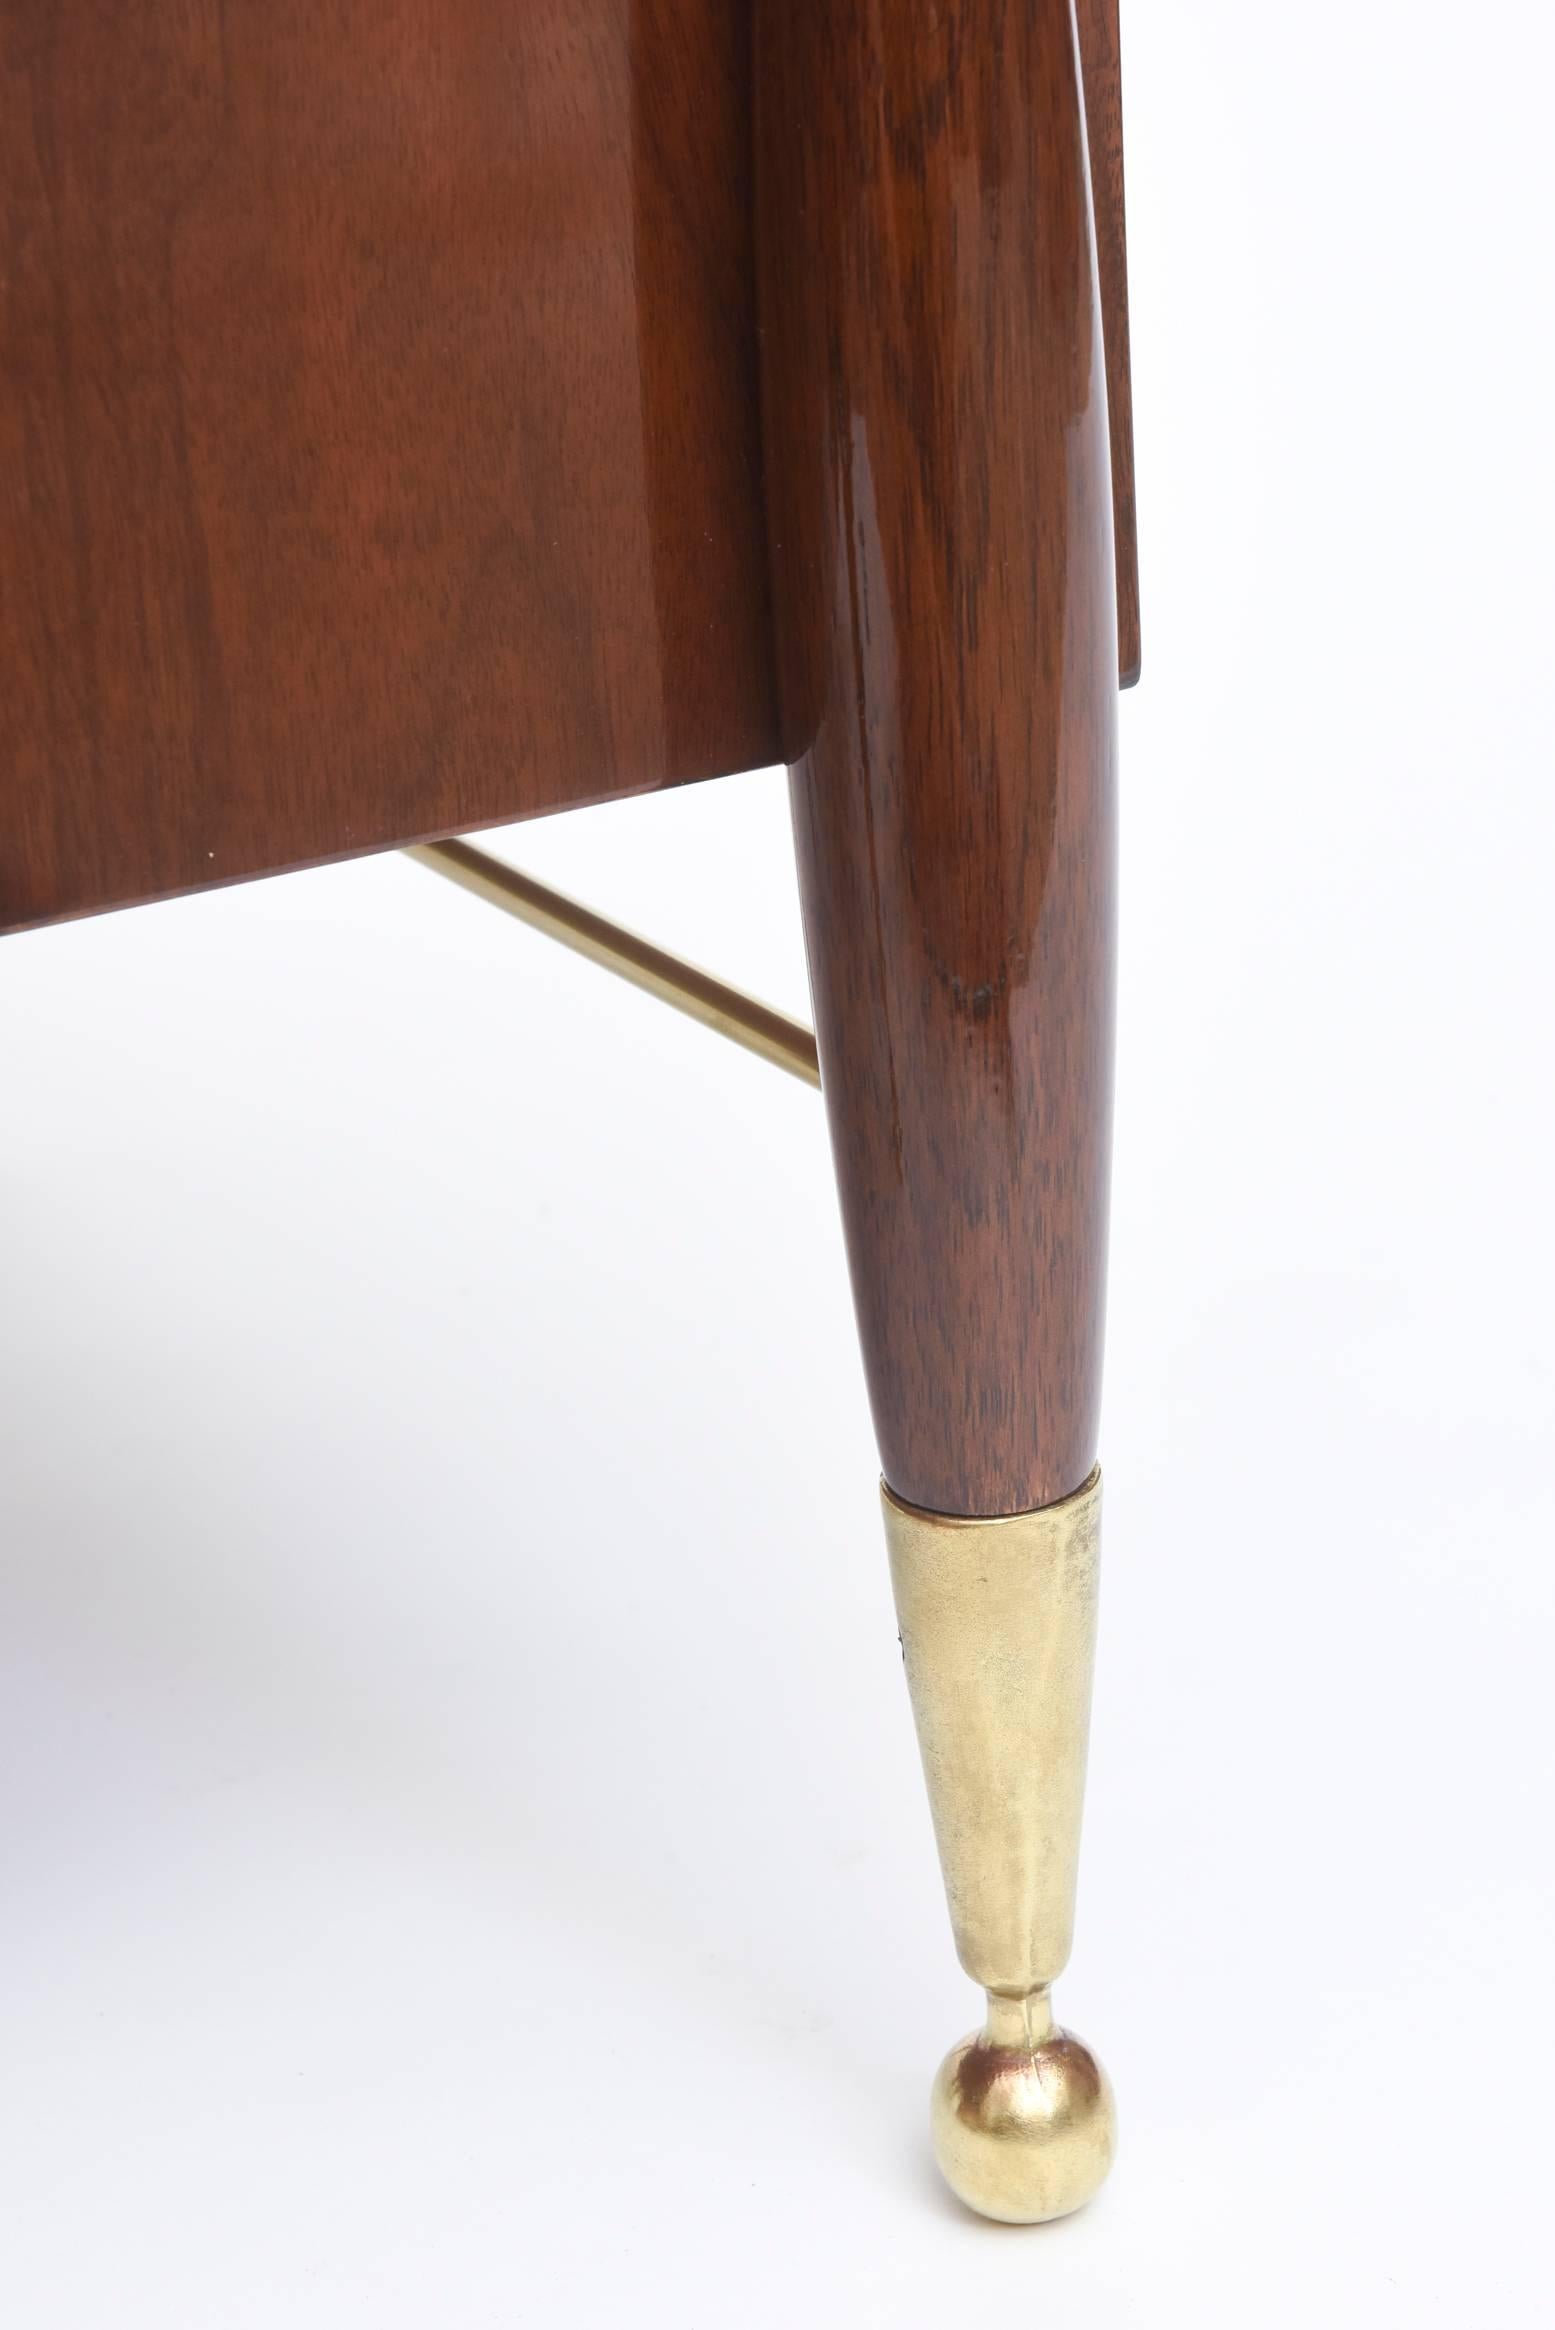 Mid-20th Century Pair Italian Modern Walnut and Bronze Bedside Tables, Melchiorre Bega, 1950's